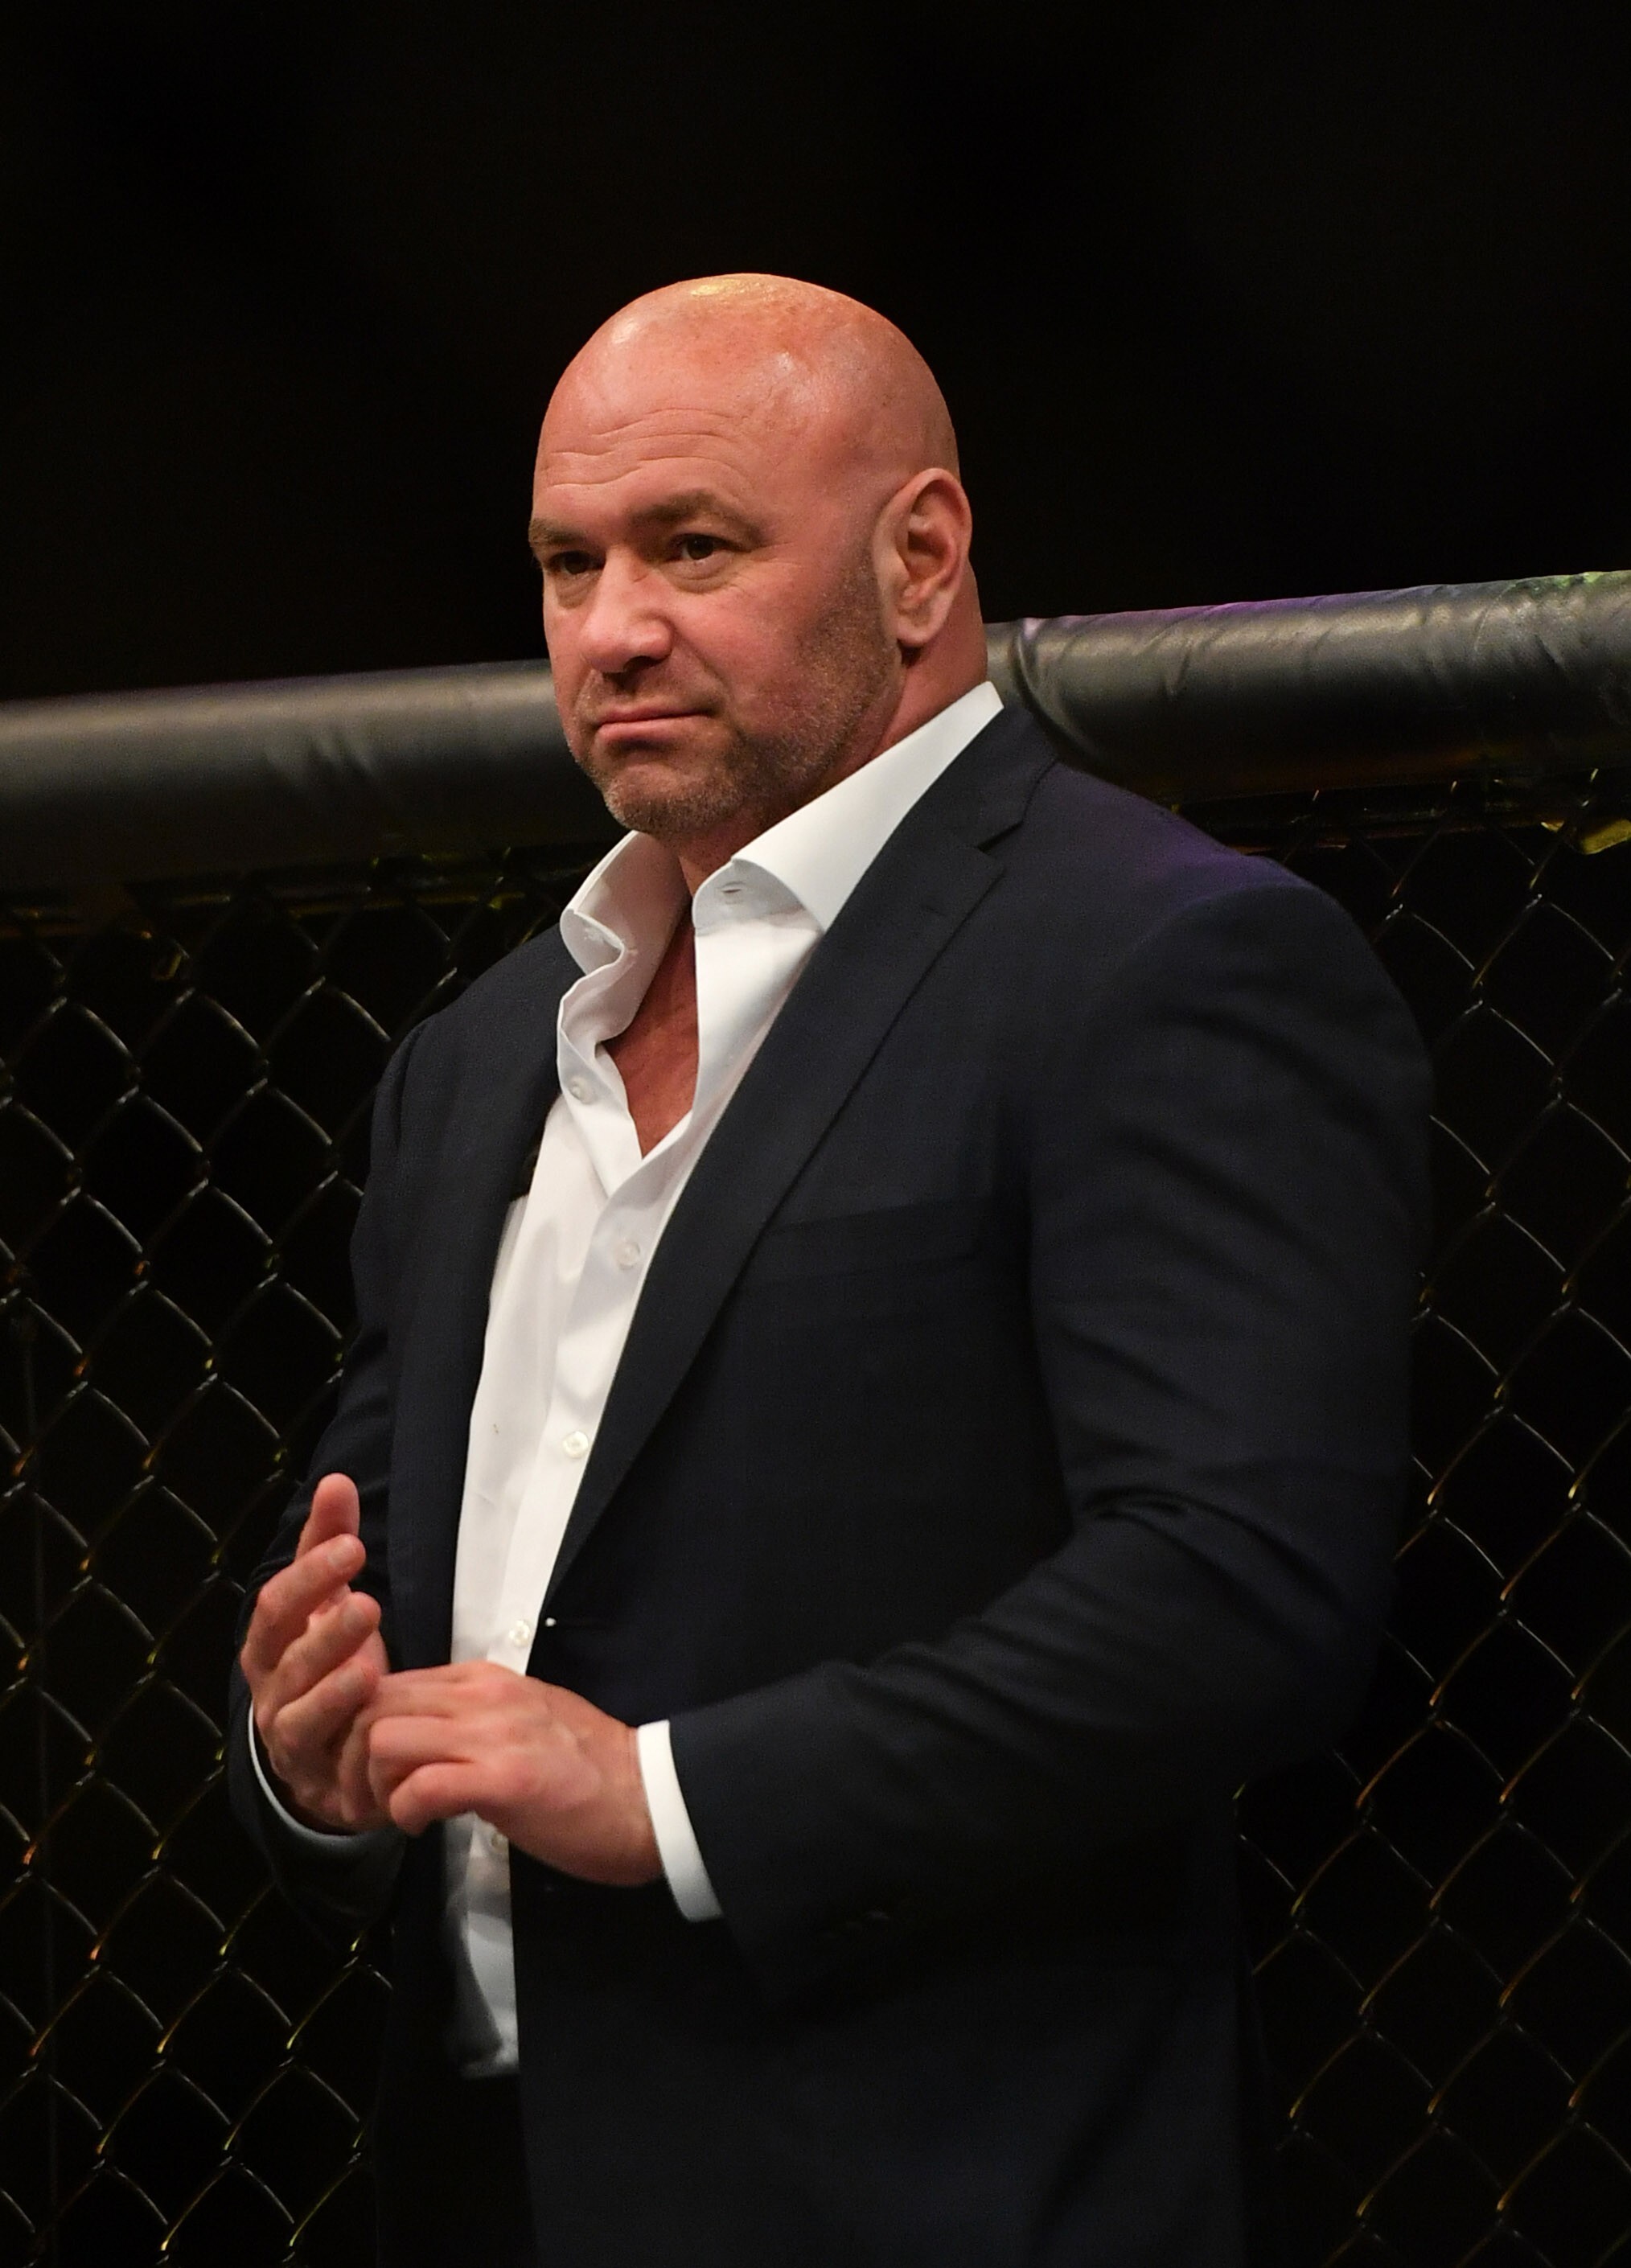 UFC president Dana White in the octagon after a fight between Henry Cejudo and Dominick Cruz at UFC 249 at the VyStar Veterans Memorial Arena in Florida in May. Photo: USA Today